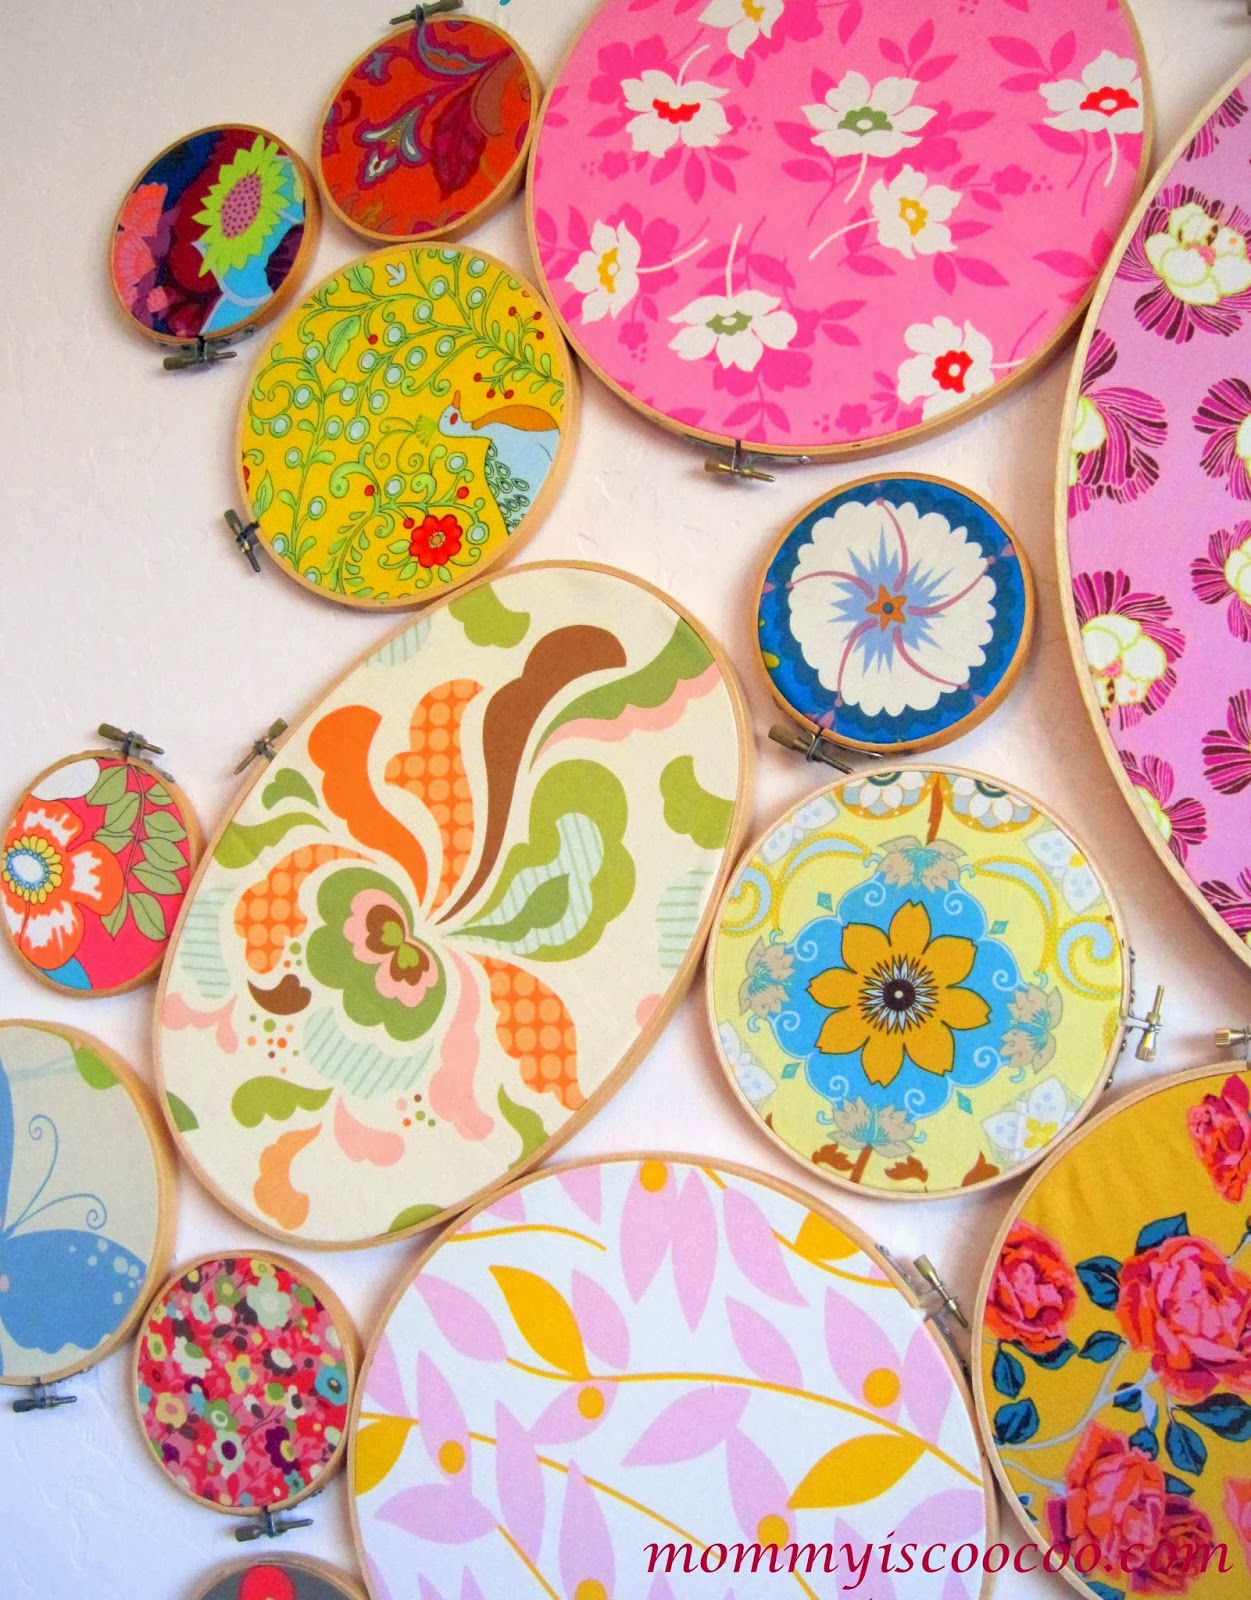 embroidery hoop wall art, fabric remnants, from mommy is coocoo